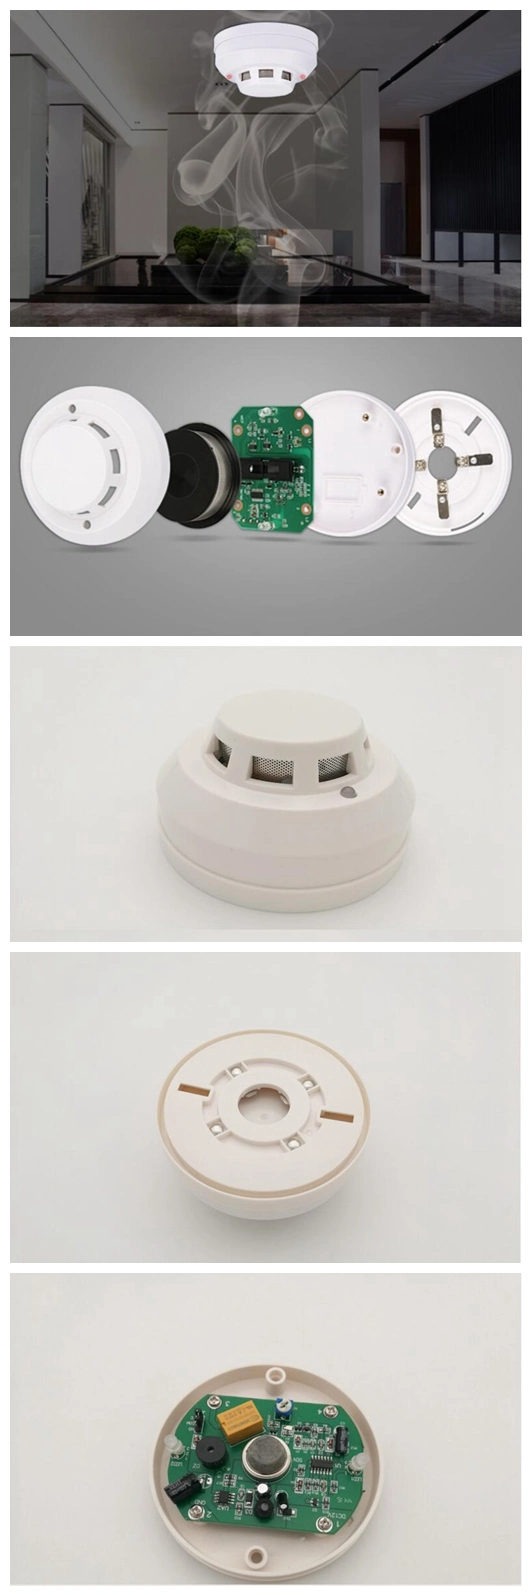 Ce Approved 4-Wire Network Photoelectric Smoke Alarm Detector